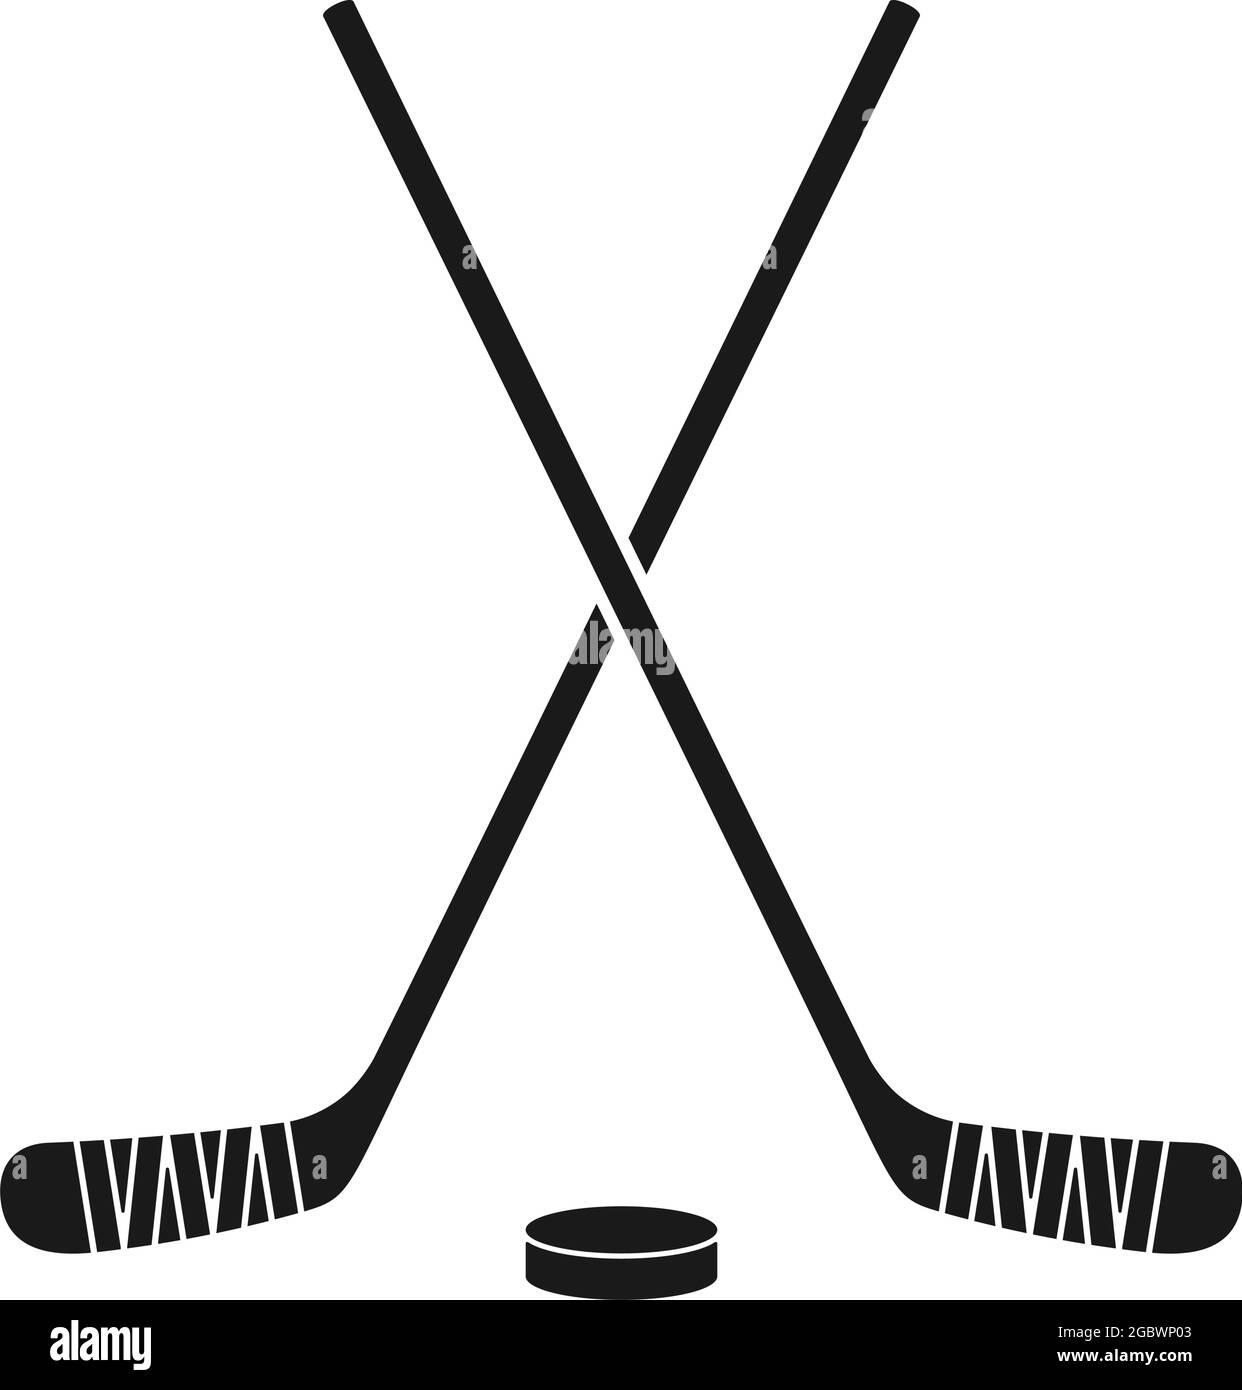 Hockey Stick Photos, Download The BEST Free Hockey Stick Stock Photos & HD  Images